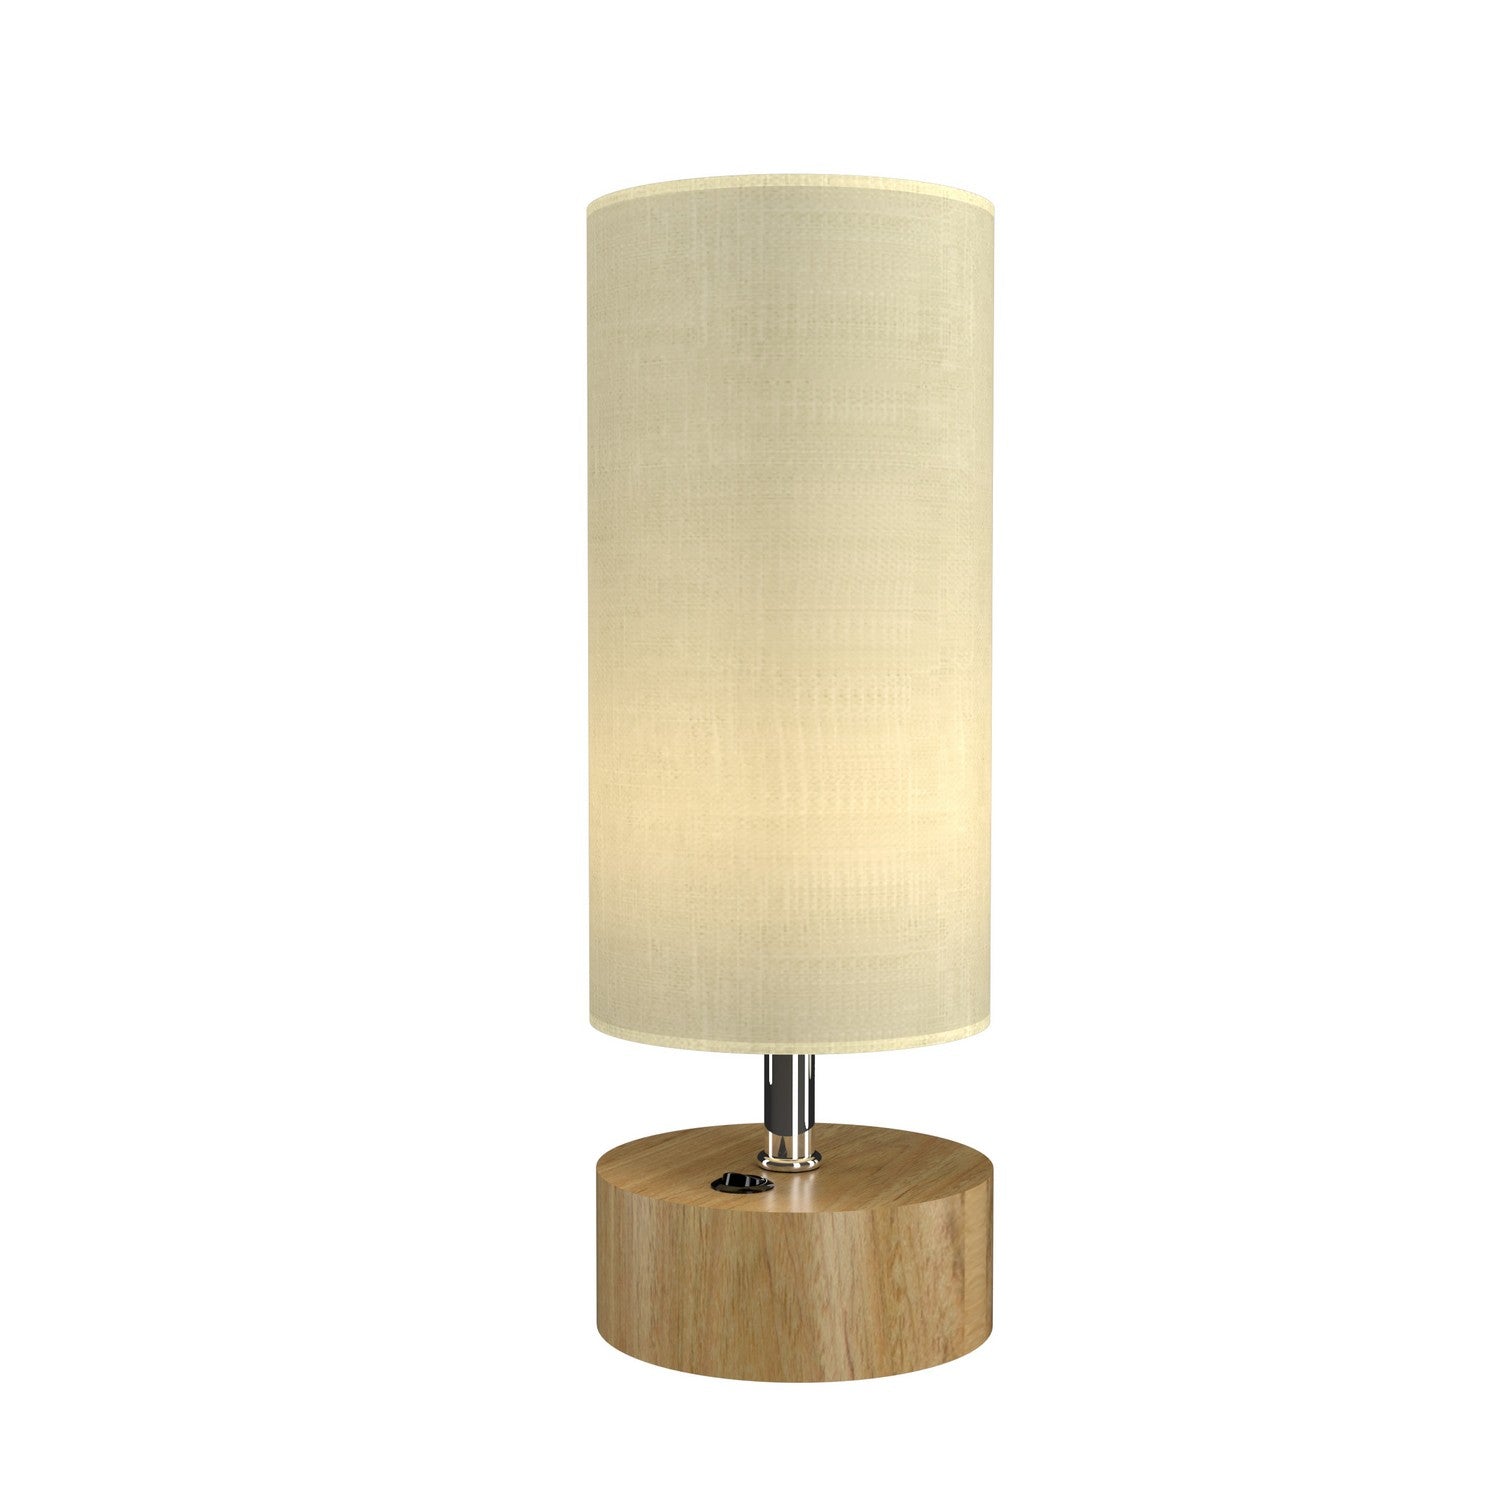 Accord Lighting - 7100.09 - LED Table Lamp - Clean - Louro Freijo